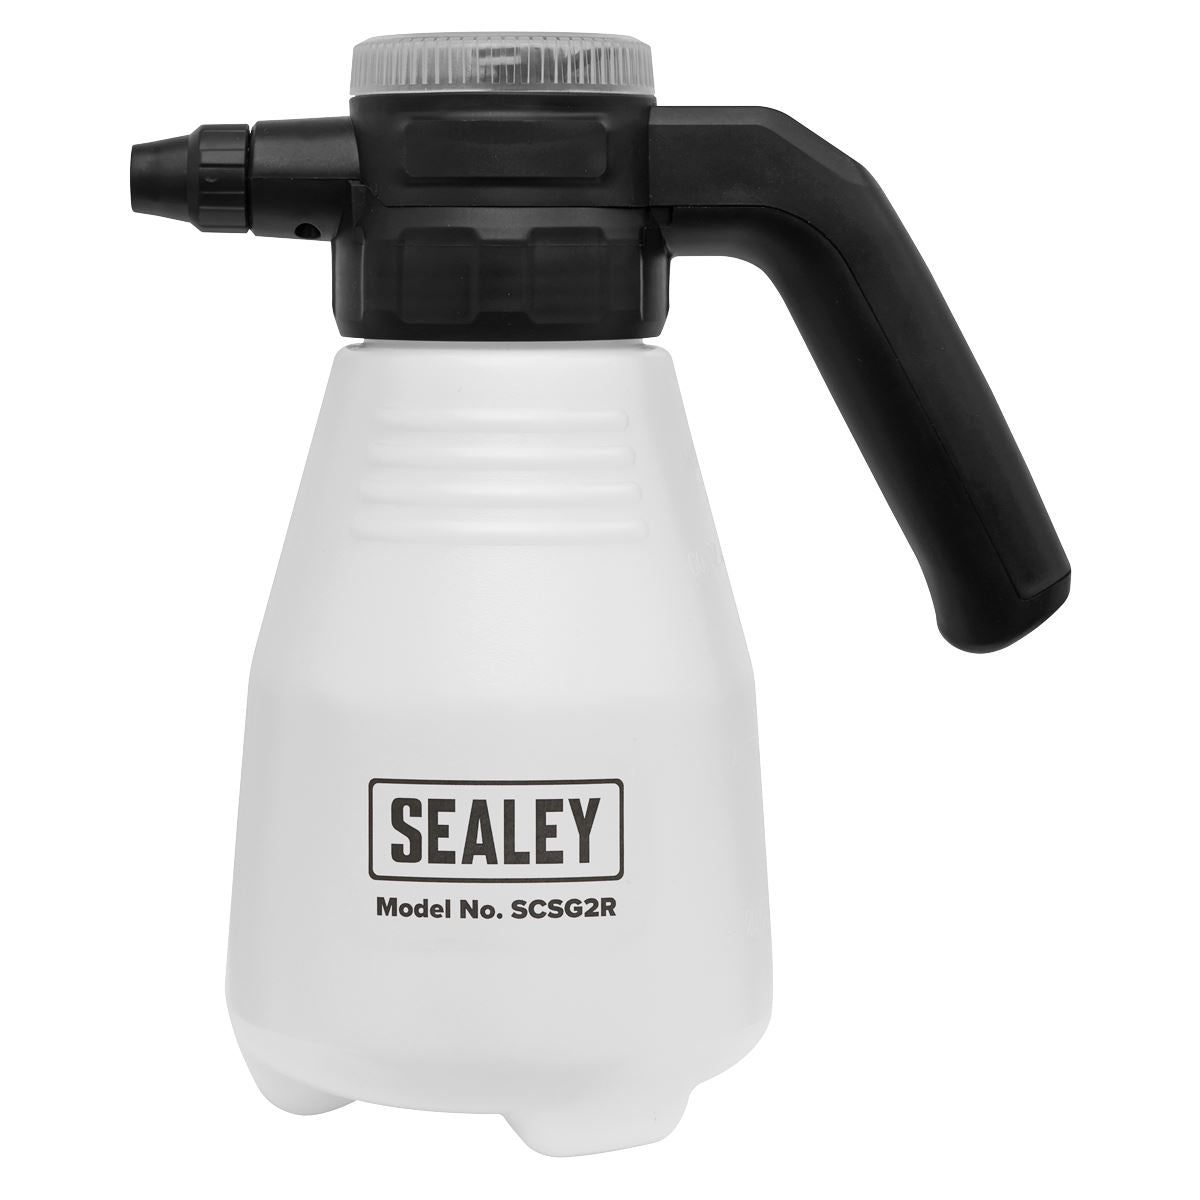 Sealey Rechargeable Pressure Sprayer 2L